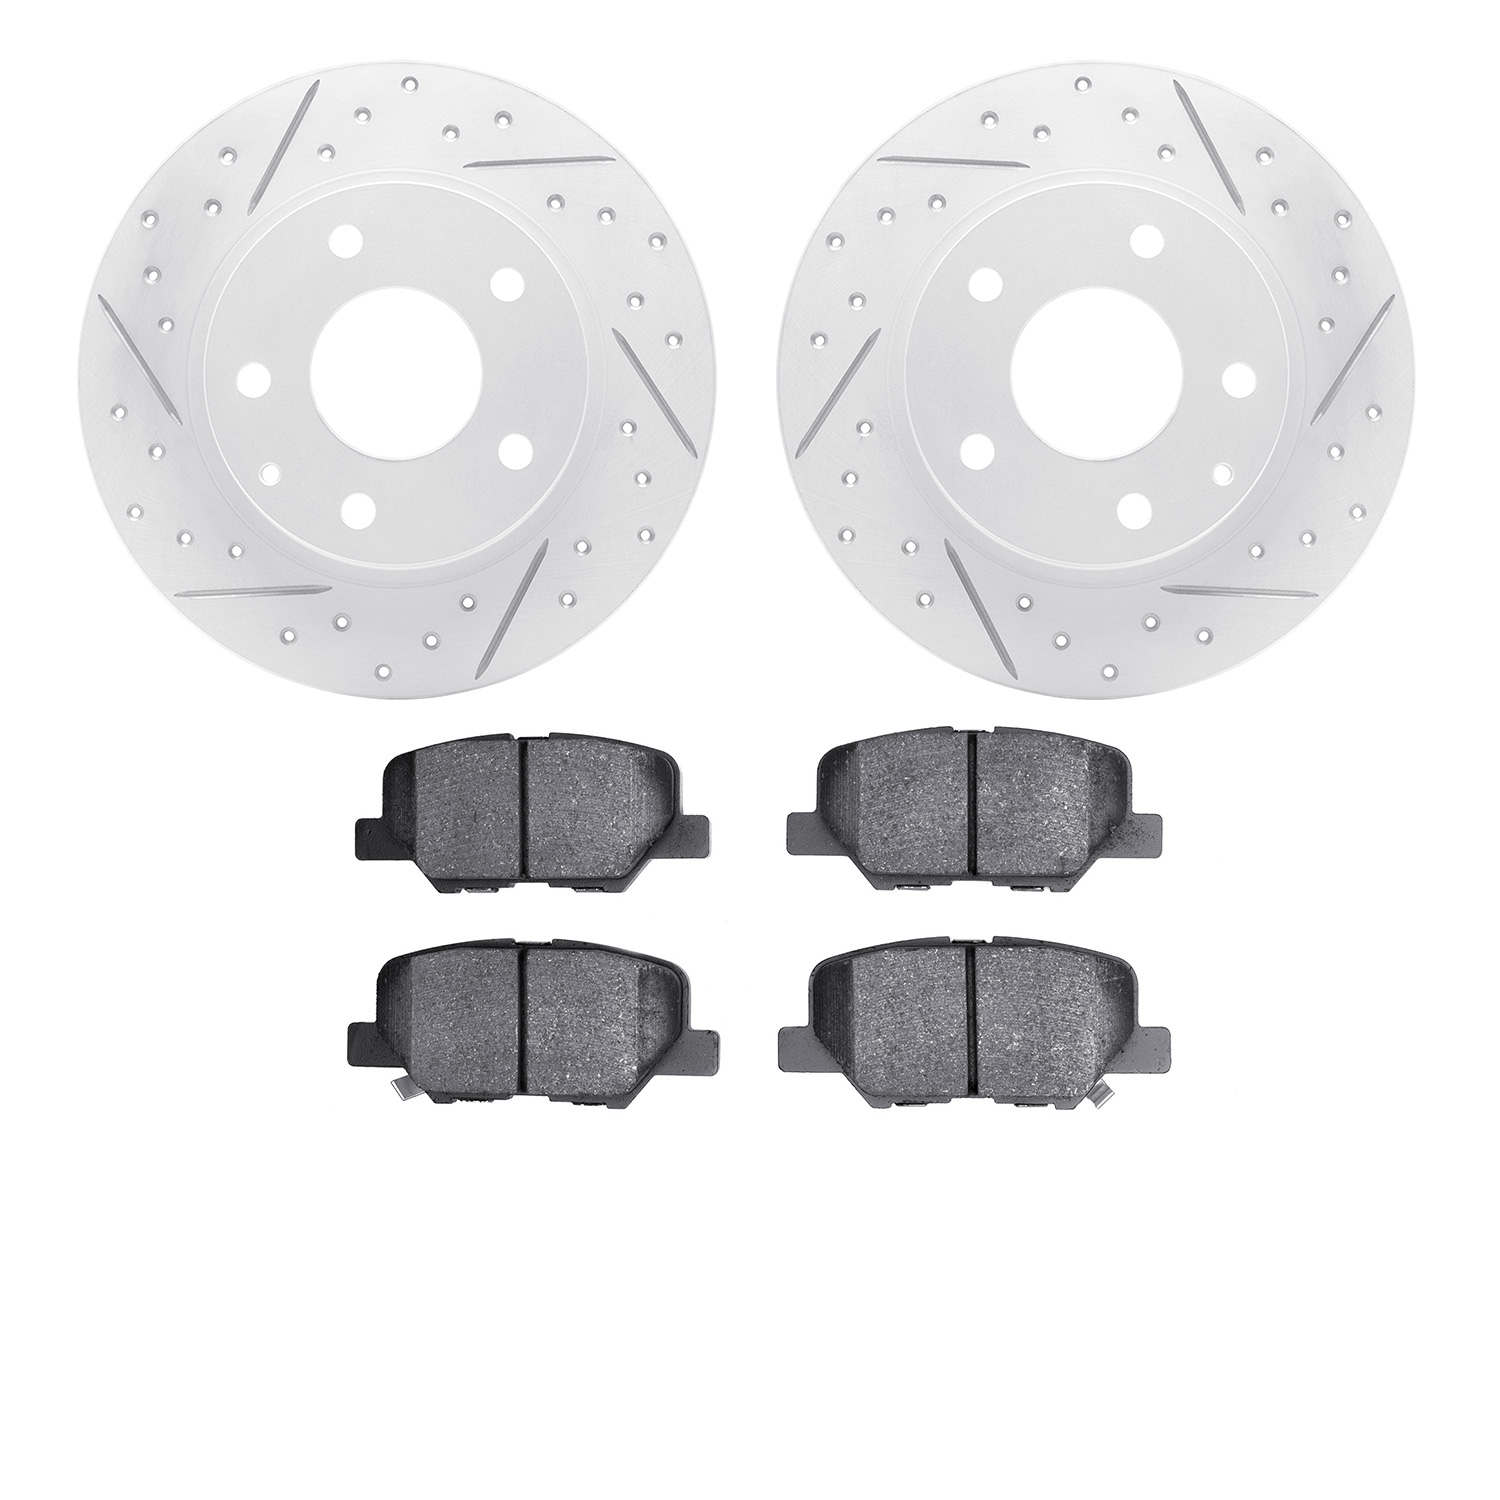 2502-80026 Geoperformance Drilled/Slotted Rotors w/5000 Advanced Brake Pads Kit, 2014-2016 Ford/Lincoln/Mercury/Mazda, Position: